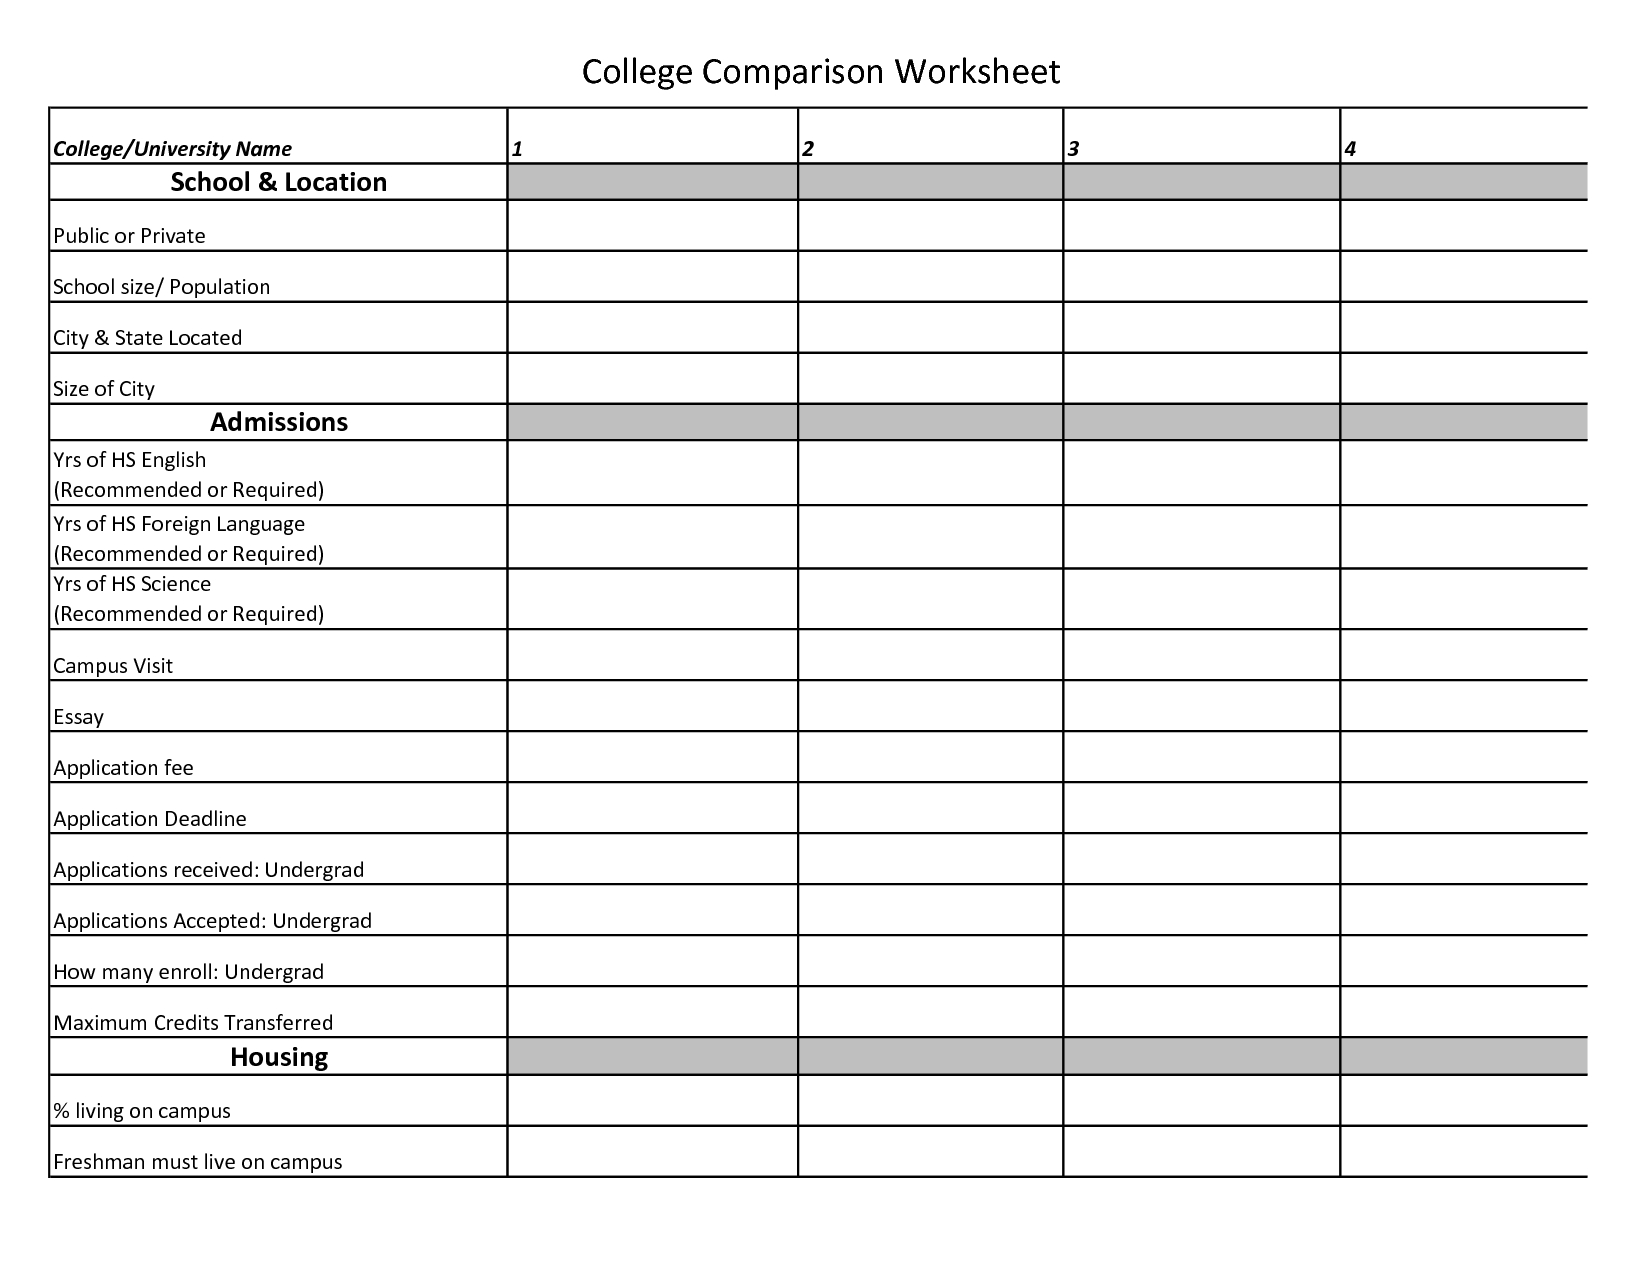 College Cost Spreadsheet With College Cost Comparison Worksheet Template Best Maggi Locustdesign